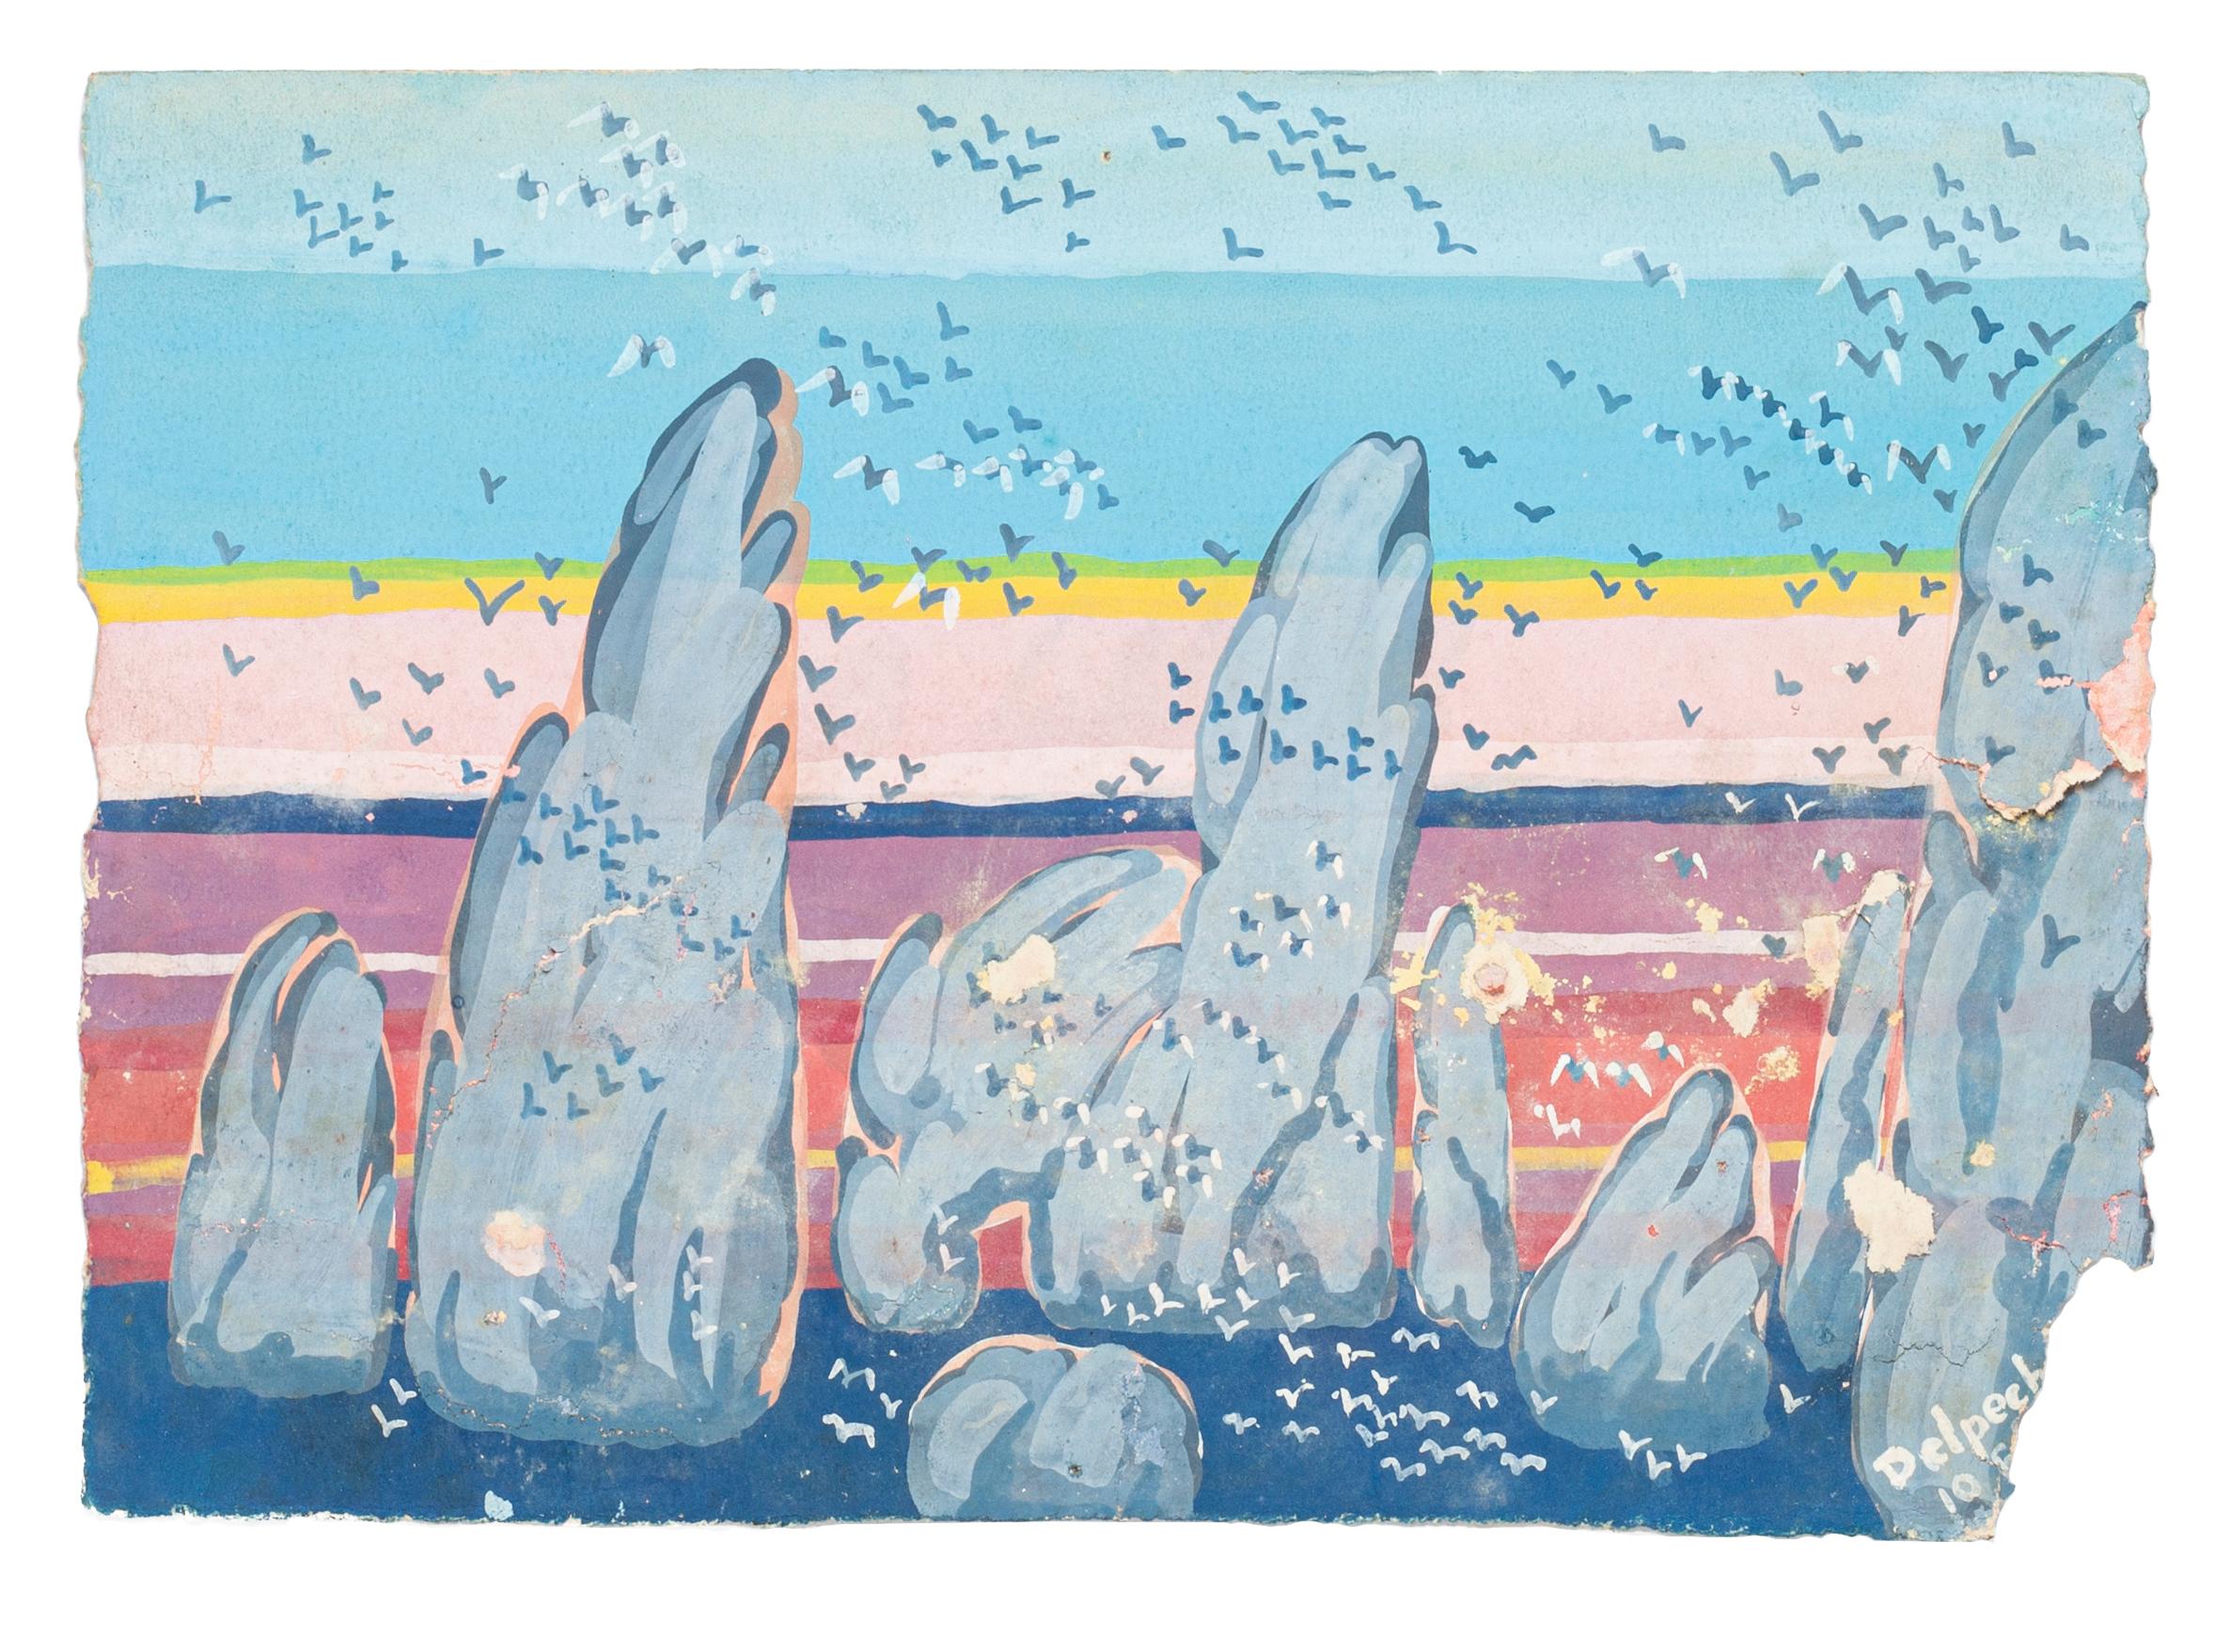 Seagulls - Watercolor on Paper by J.-R. Delpech - Mid 20th Century